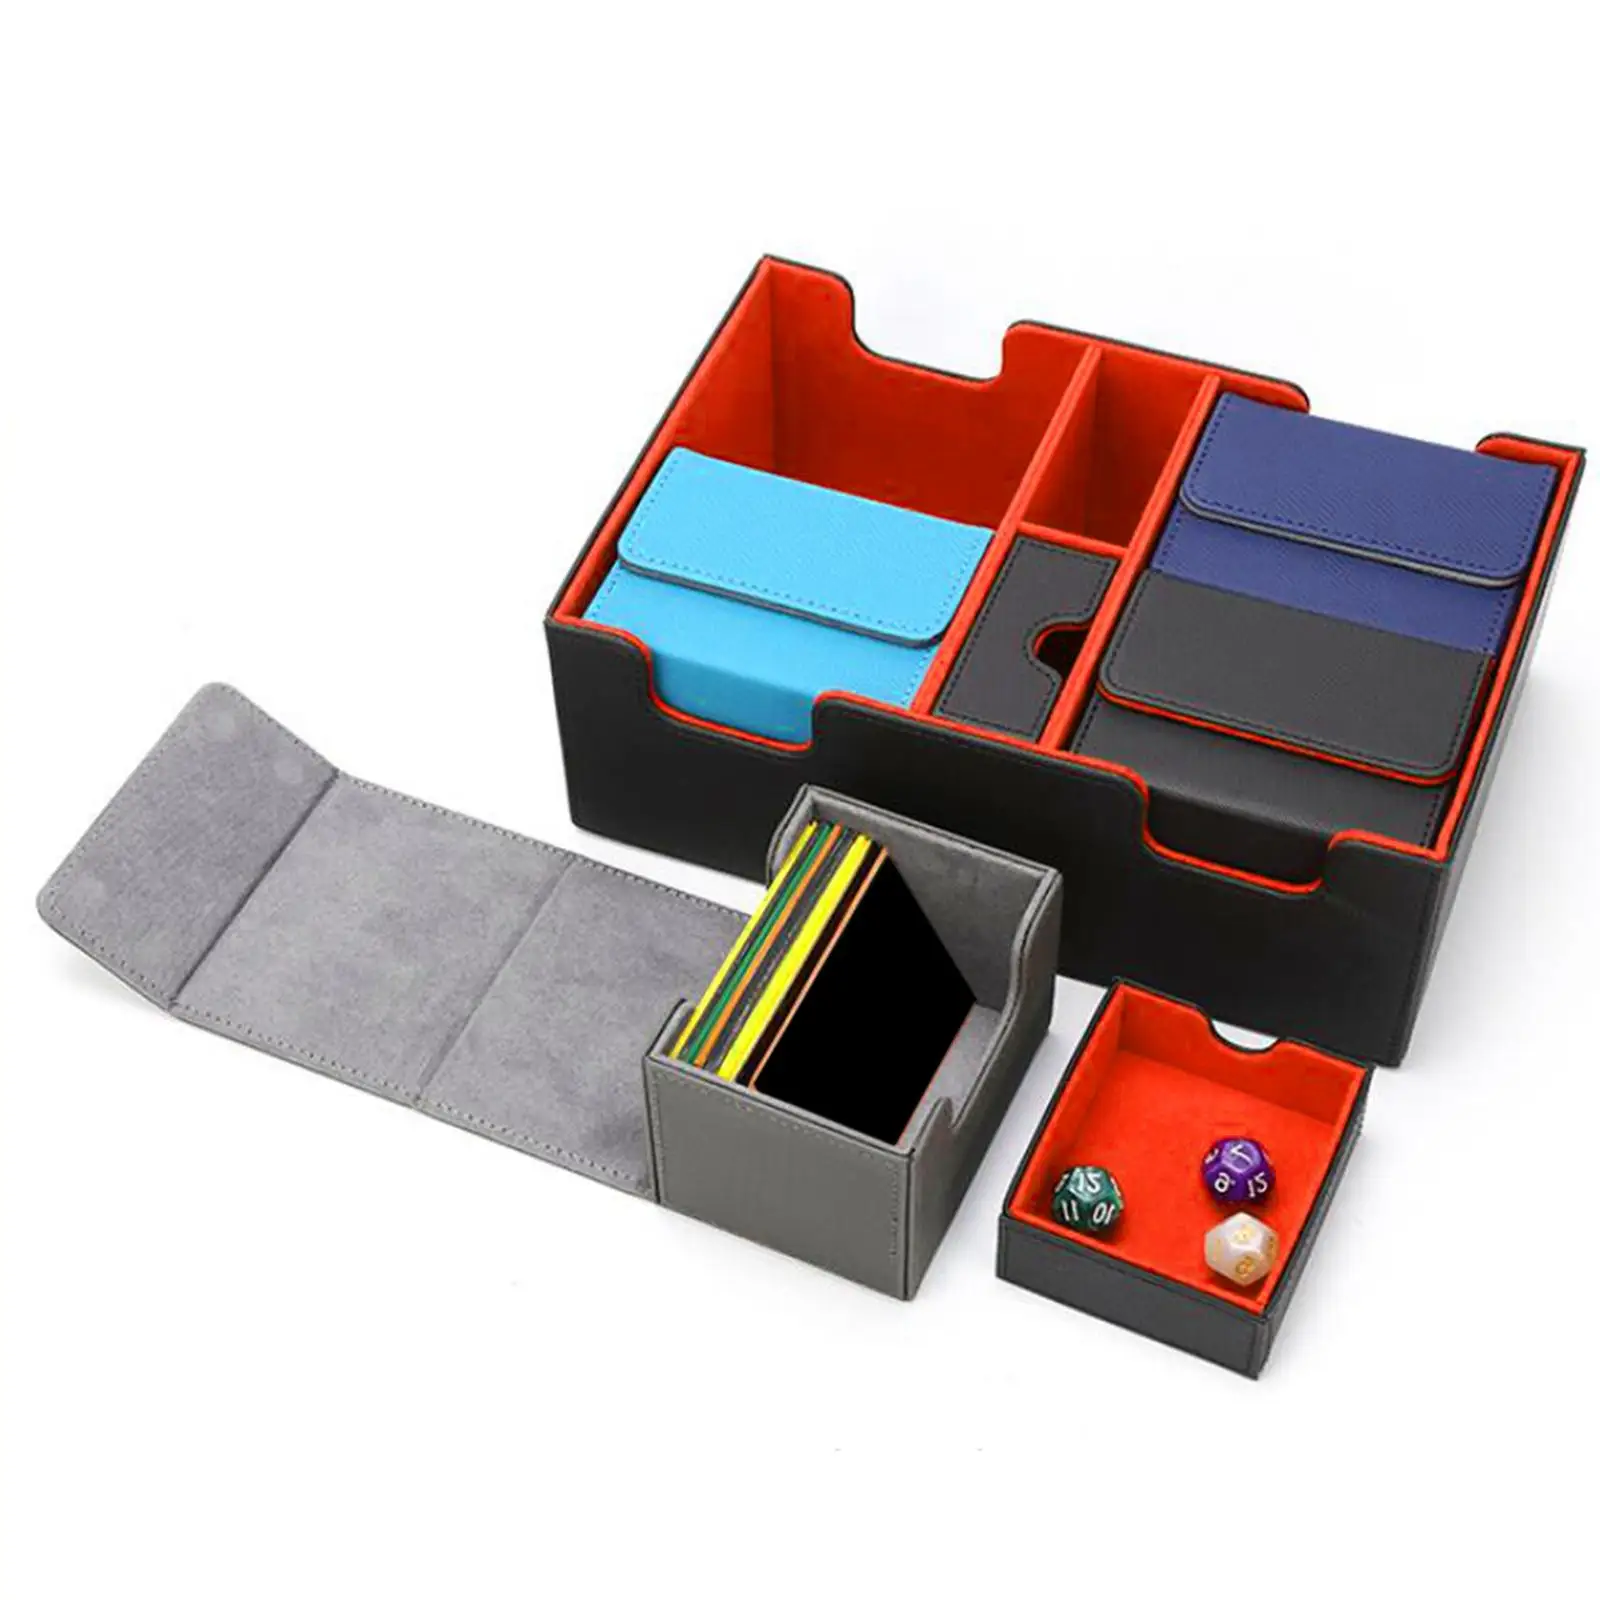 Card Deck Box Organizer, Large Capacity Container Case, Sleeved Card Storage Box